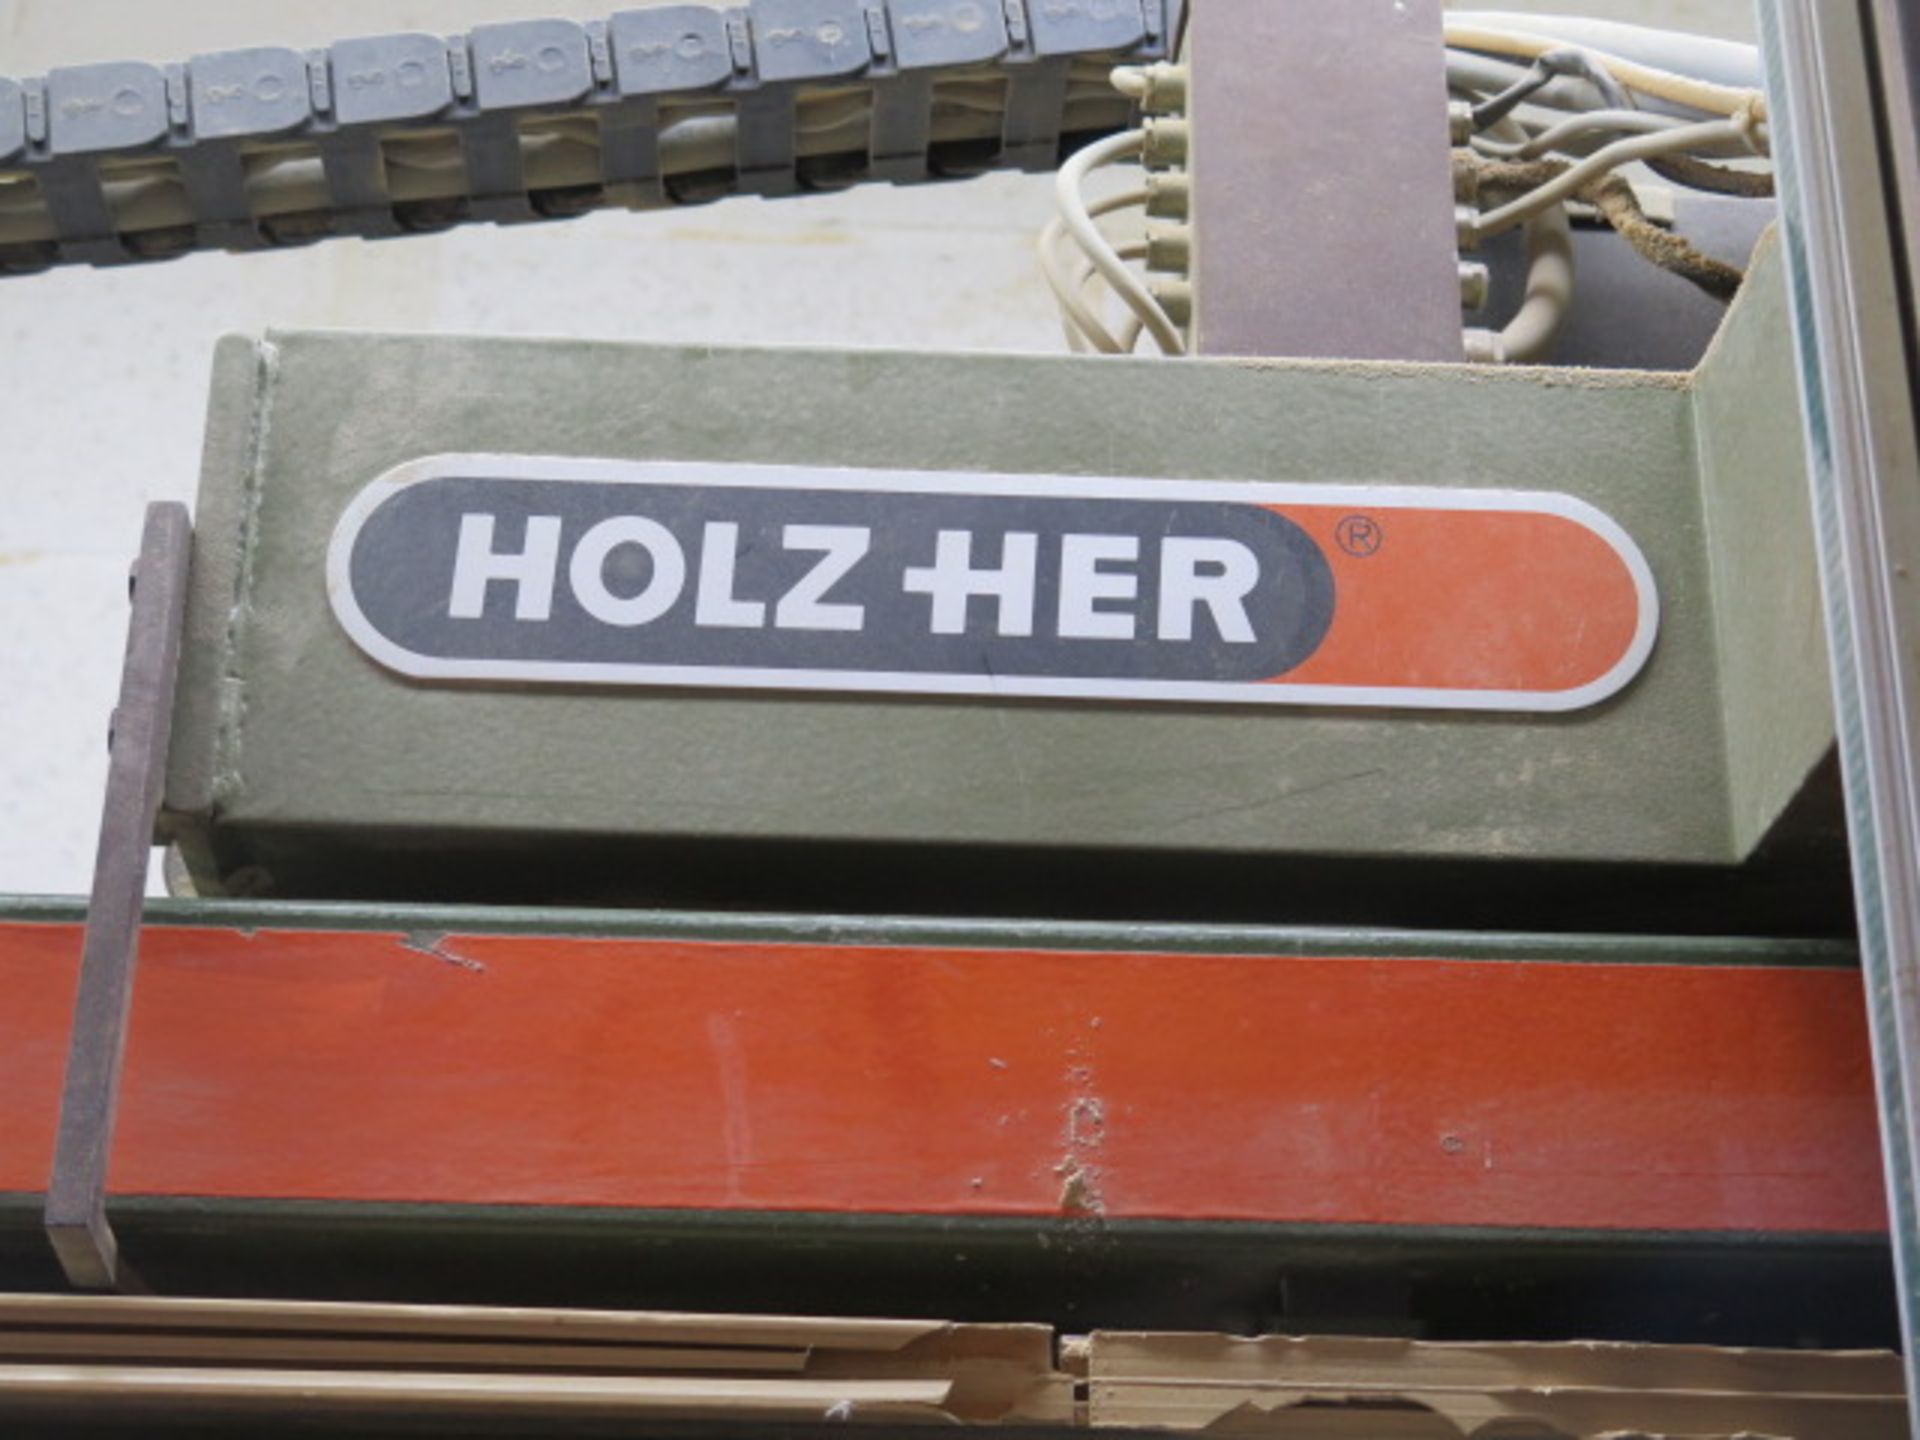 Holz-Her “Super 1270 Automatic” 10’ Vertical Panel Saw s/n 641 (SOLD AS-IS - NO WARRANTY) - Image 10 of 11